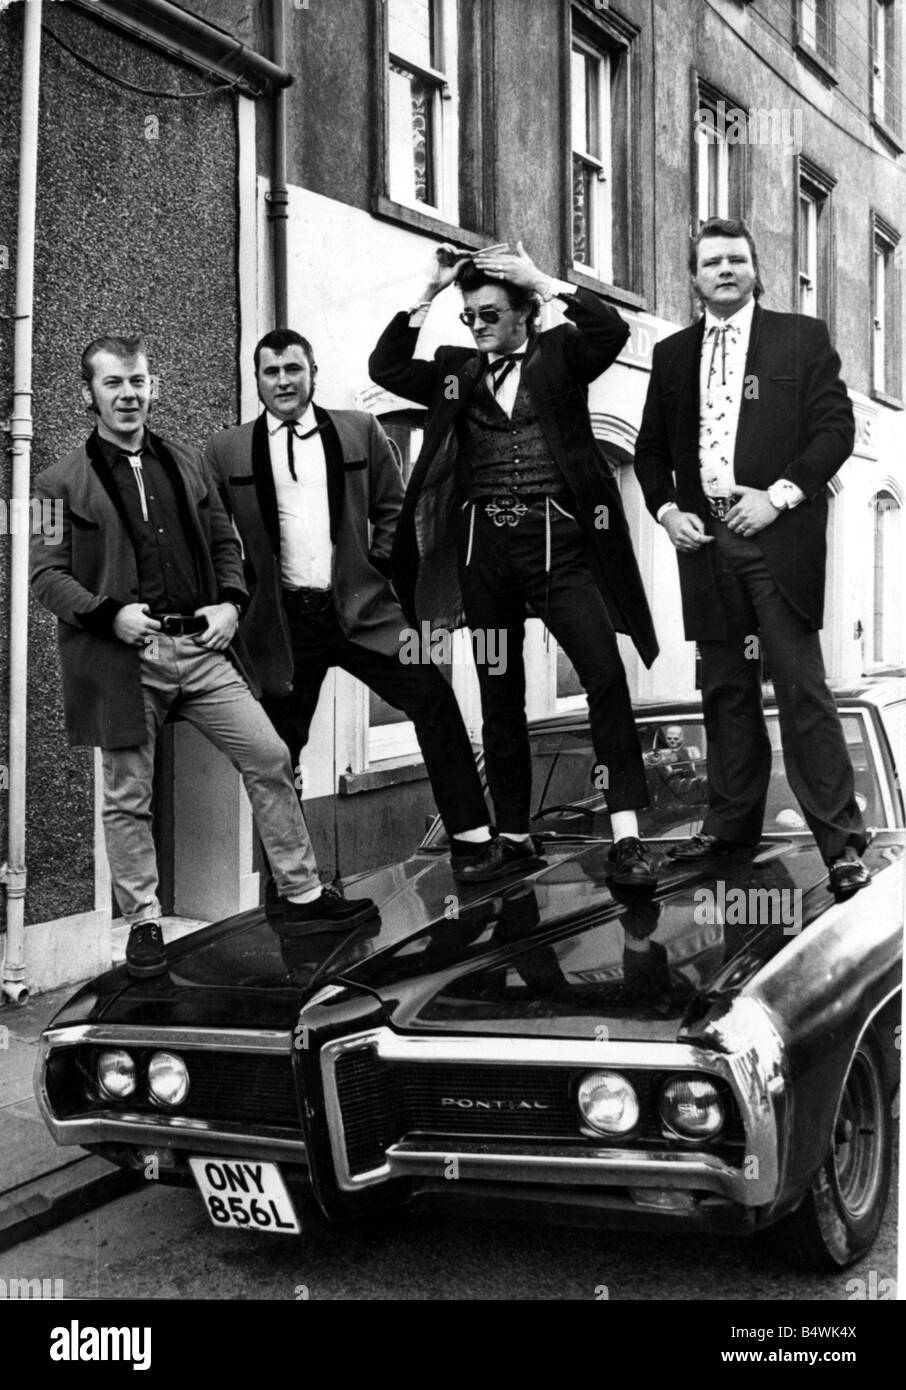 Teddy Boys Teddy boy Jeff Jenkins left known as Jinx with fellow Teds from left Boby Thomas Rocky Michael Gough Guff and Tony Collins Zak and one of their Tedmobiles a Pontiac Parisienne outside their Tedquarters in the Fforchneol Arms 13th May 1975 Western Mail and Echo Copyright Image Stock Photo